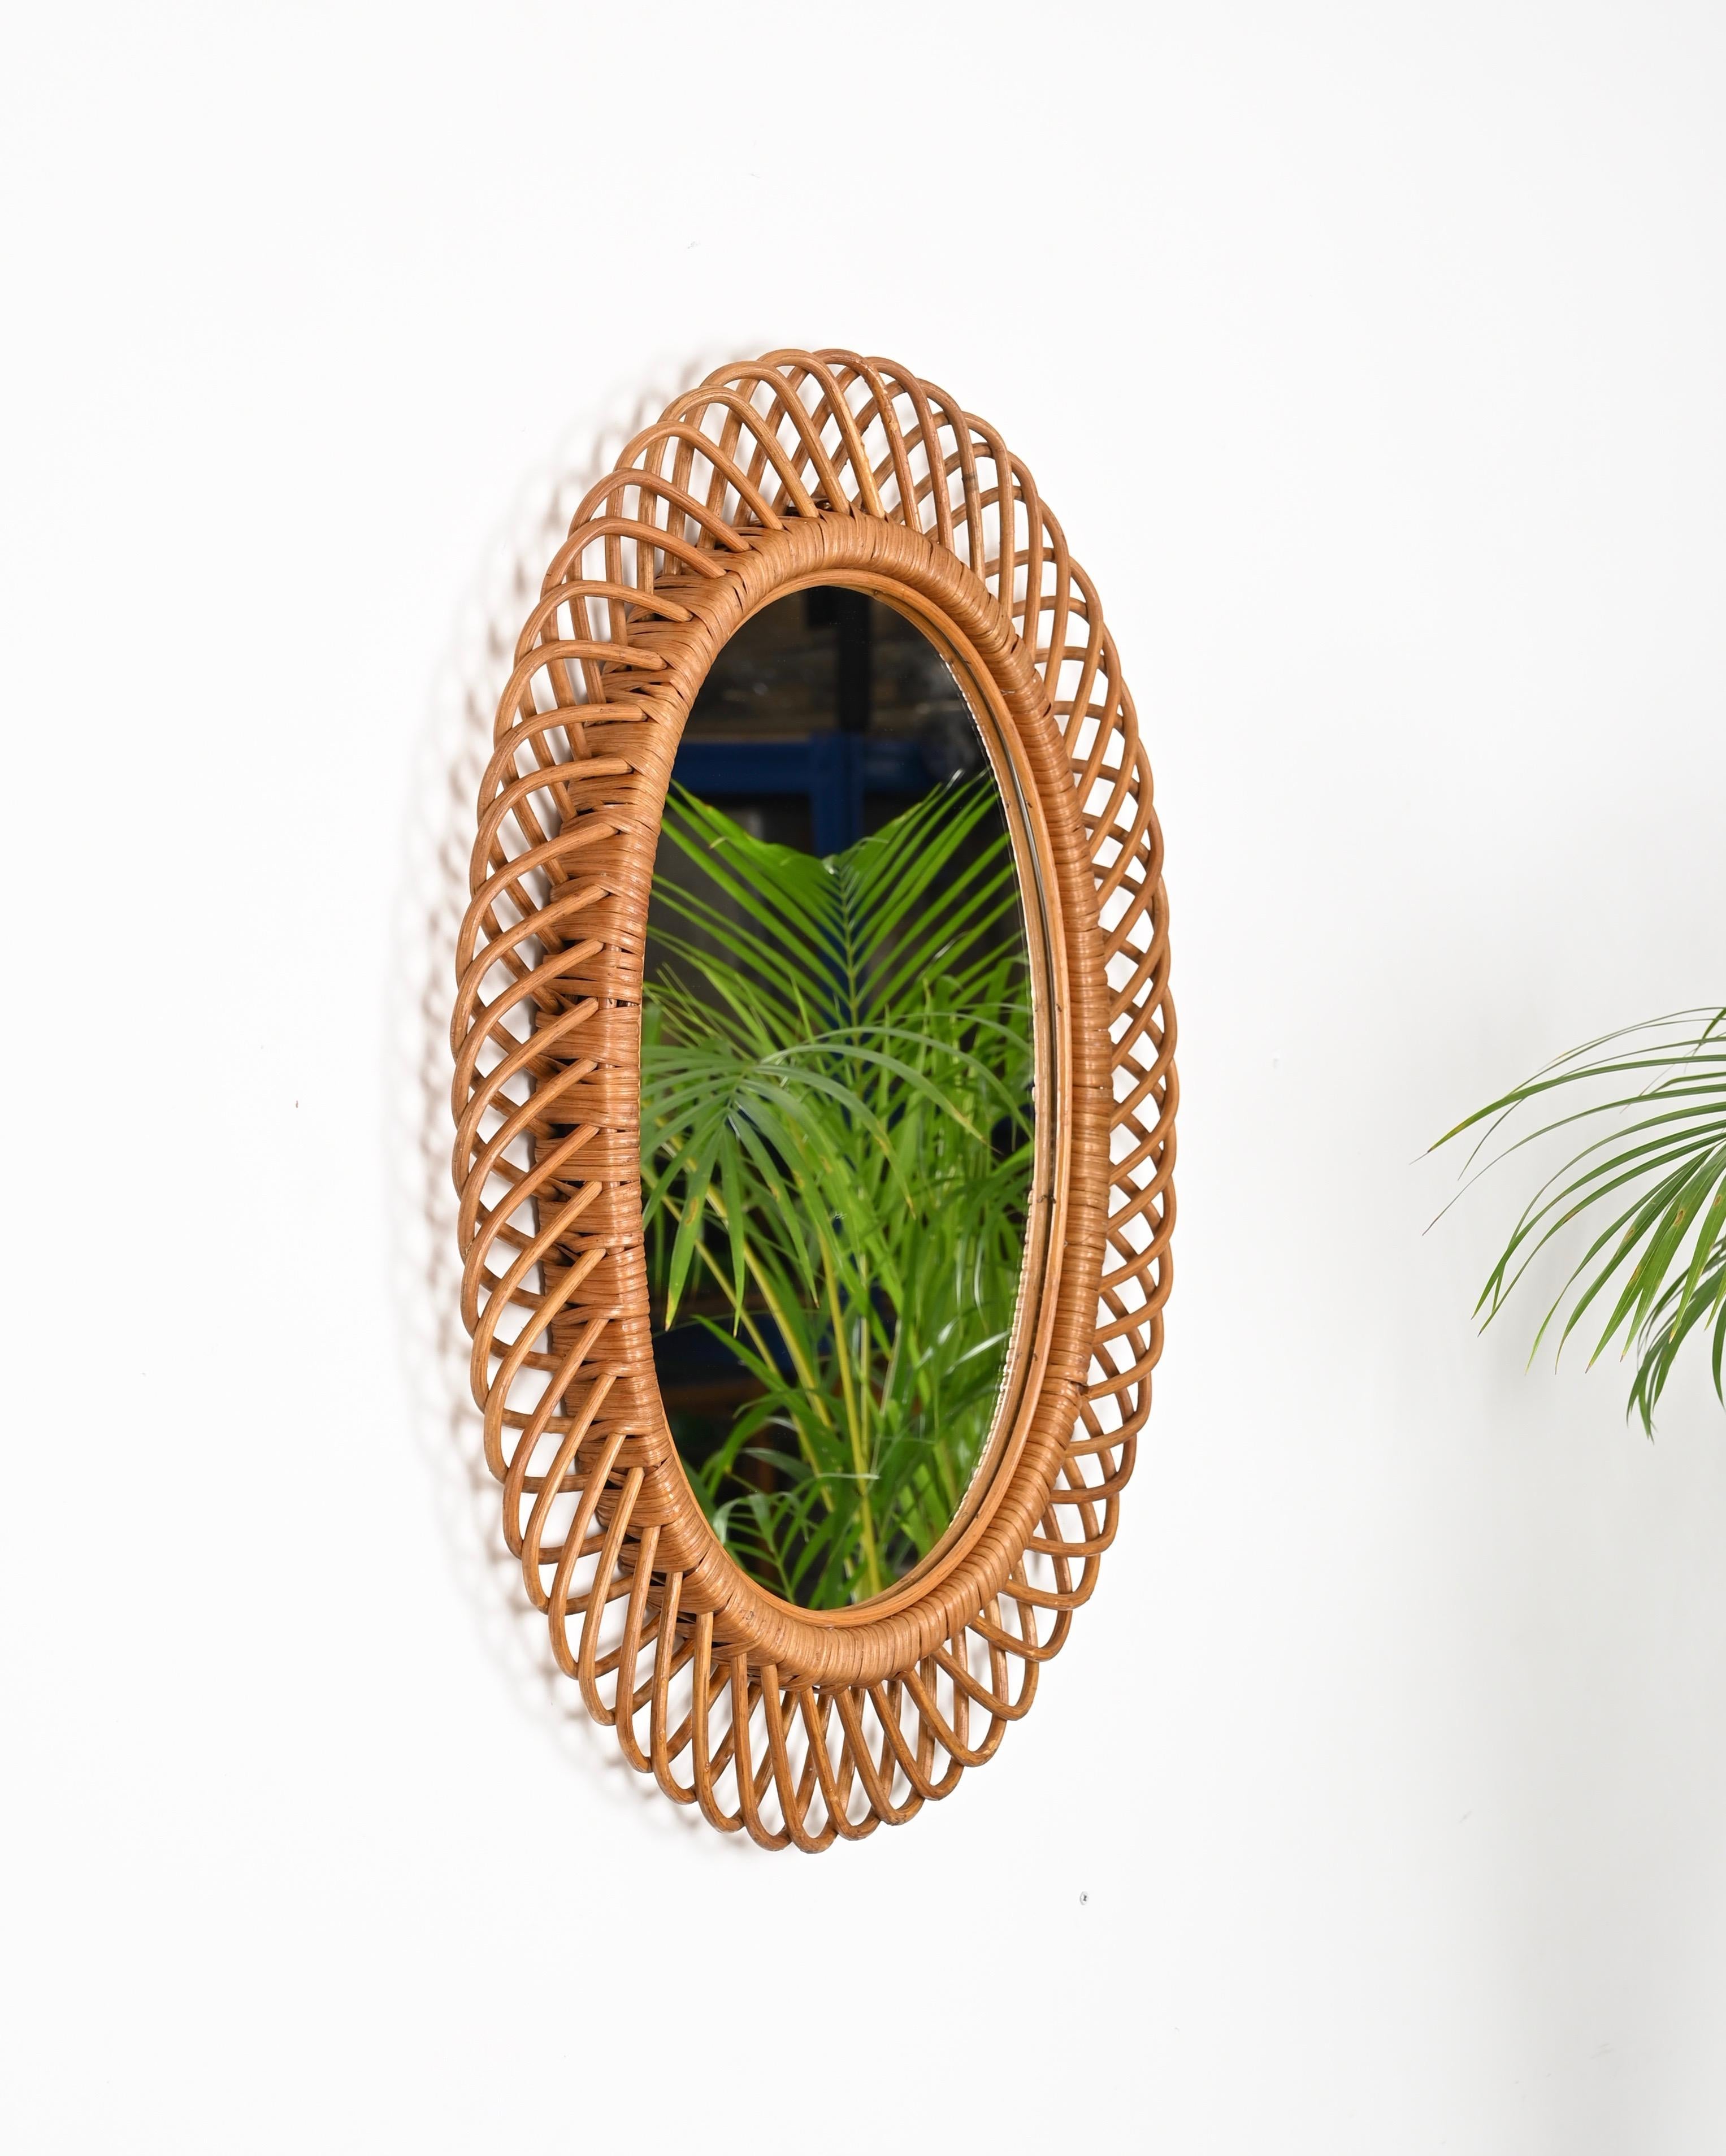 Marvelous French Riviera style oval mirror fully made in curved rattan, bamboo and woven wicker. This lovely mirror was designed by Franco Albini in Italy during the 1960s. 

This charming decorative mirror was fully hand-crafted with perfect